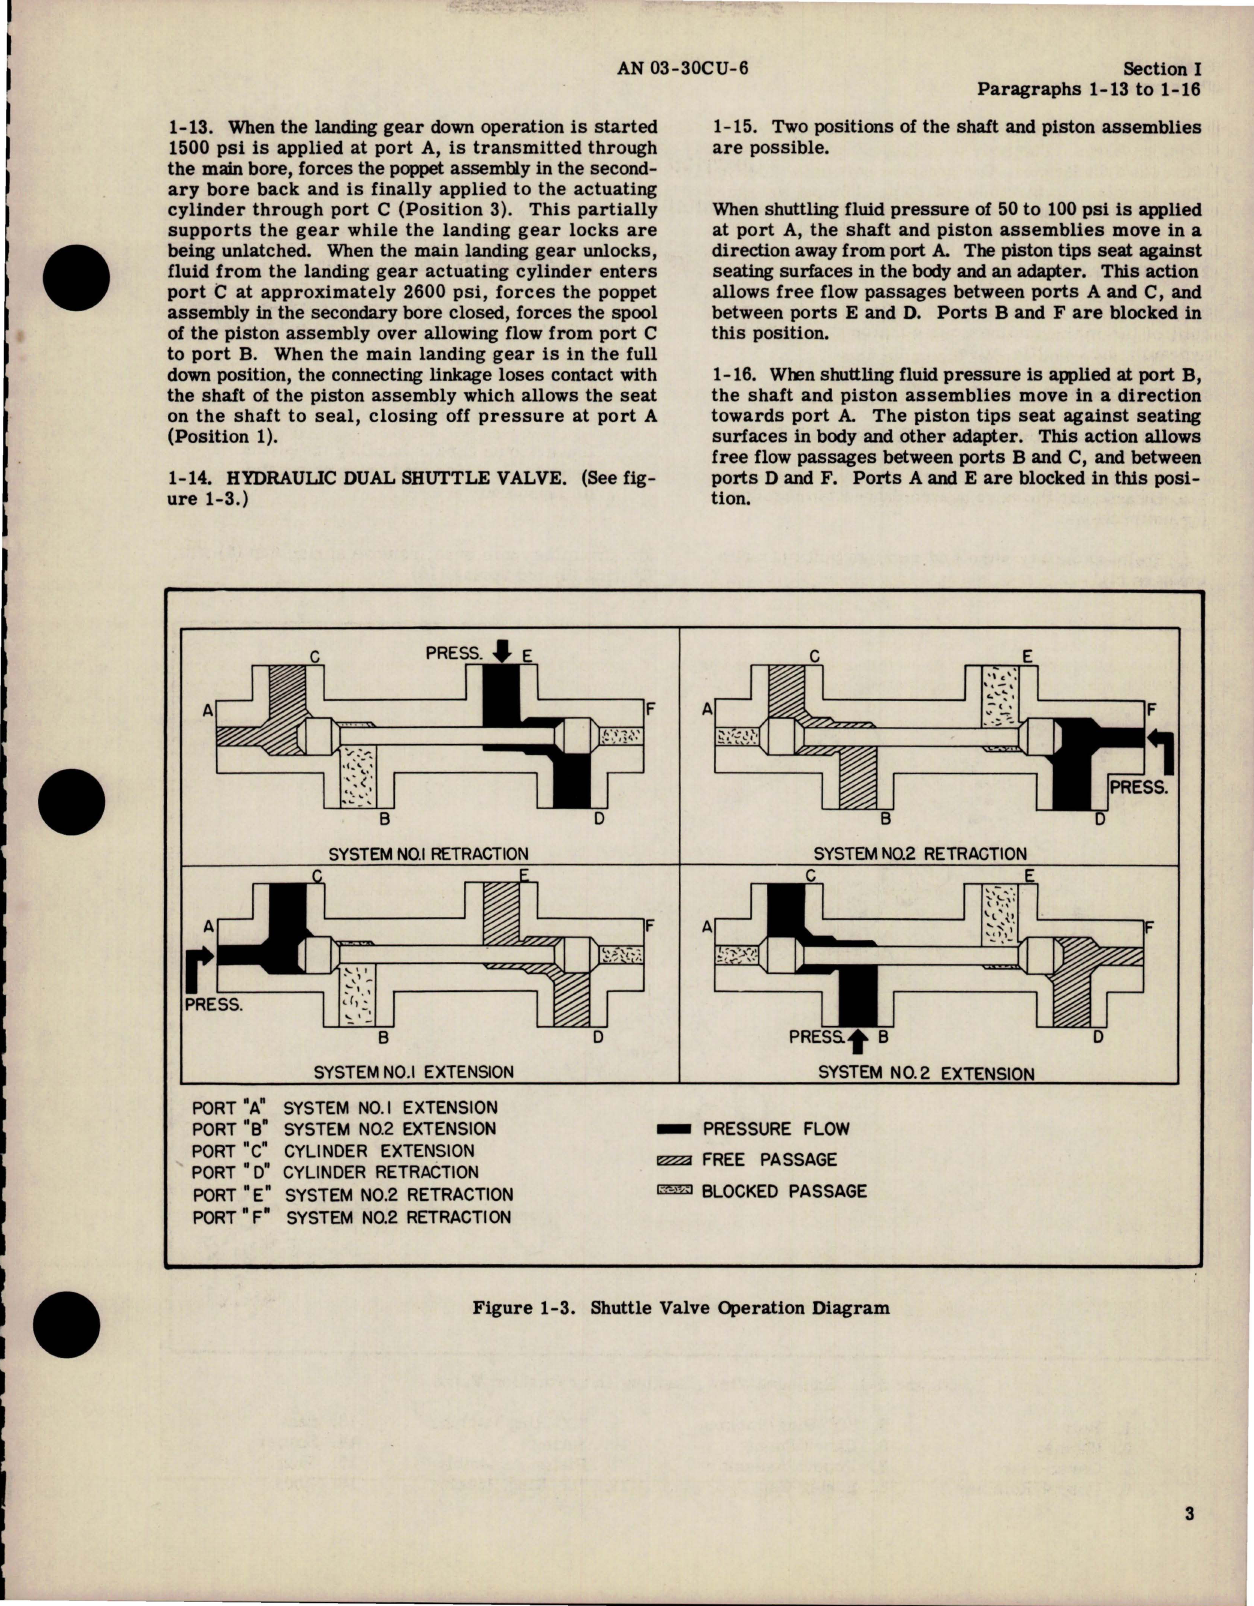 Sample page 5 from AirCorps Library document: Overhaul Instructions for Main Landing Gear Cushion Valve and Hydraulic Dual Shuttle Valve